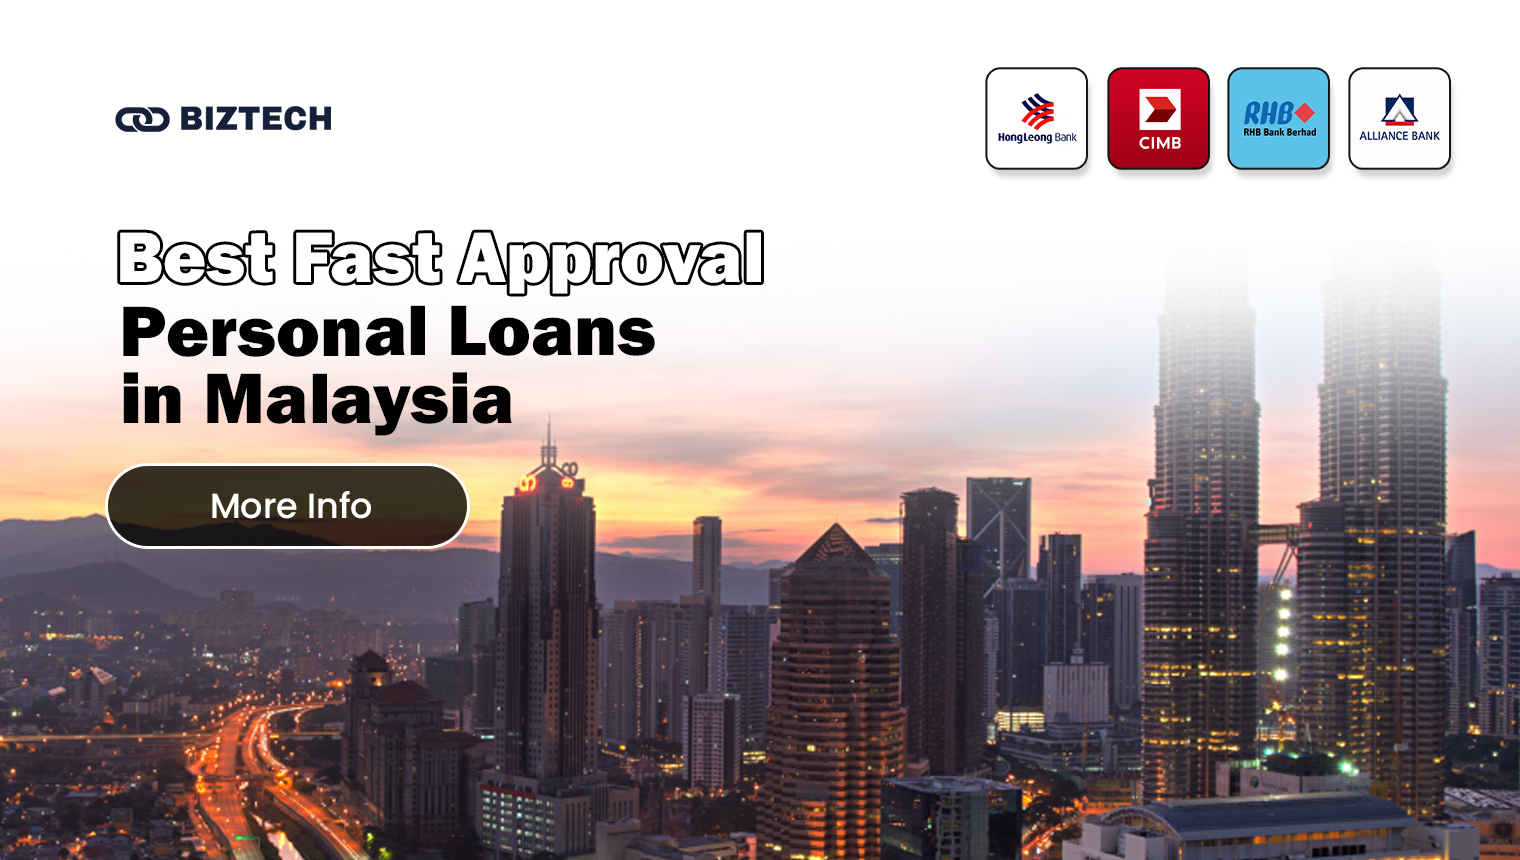 Best Fast Approval Personal Loans in Malaysia